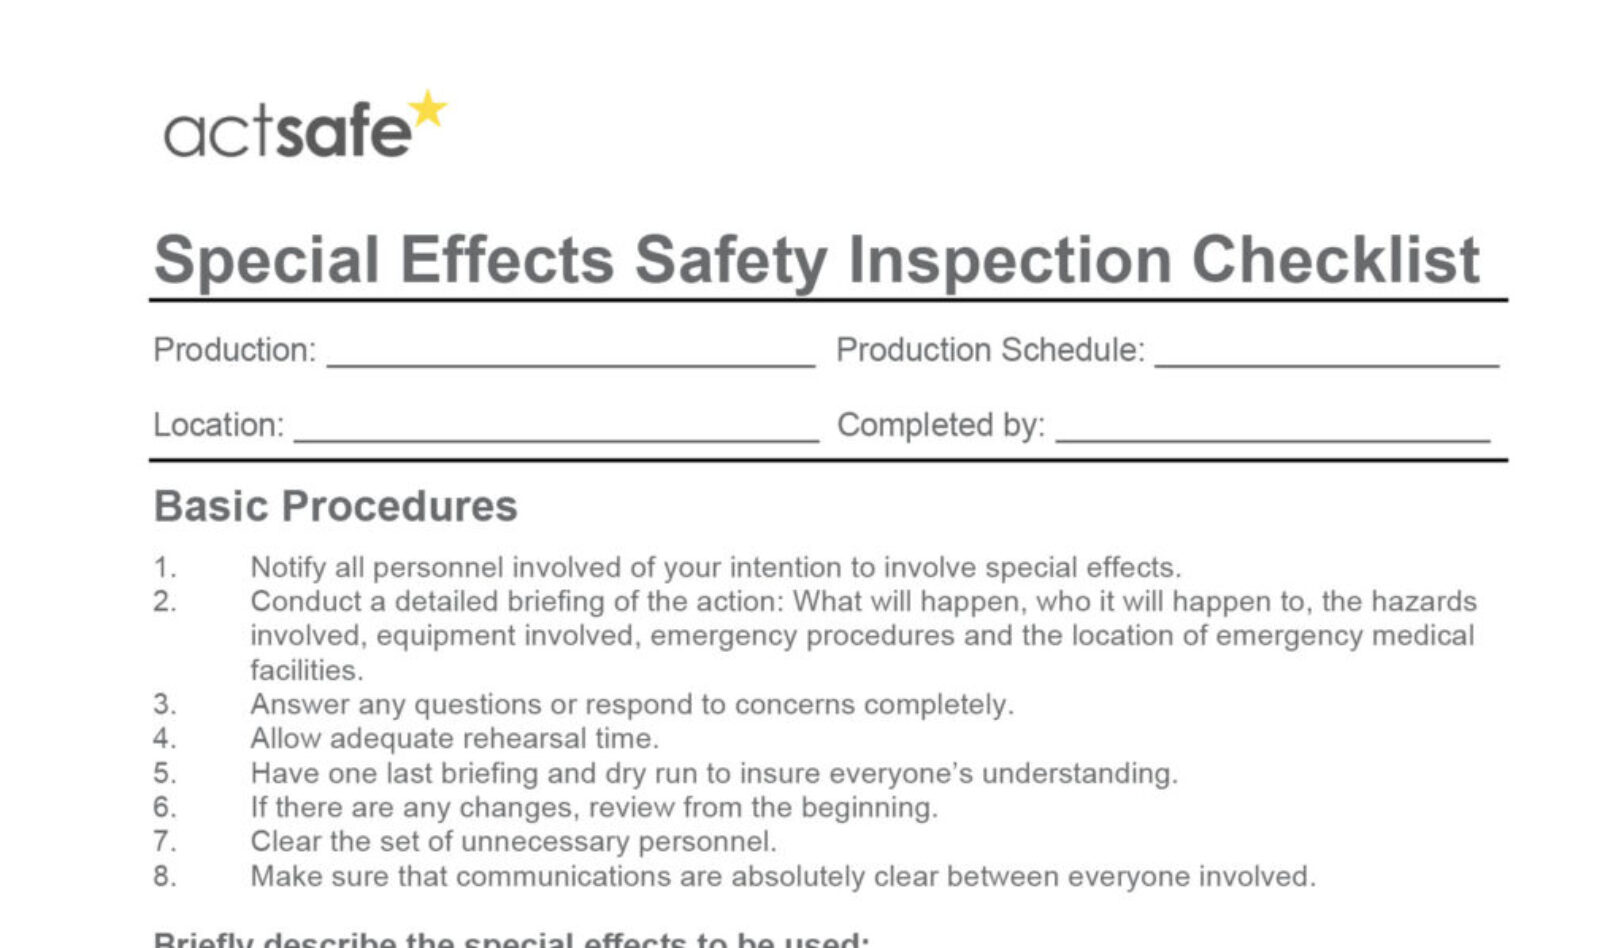 Special Effects Safety Inspection Checklist